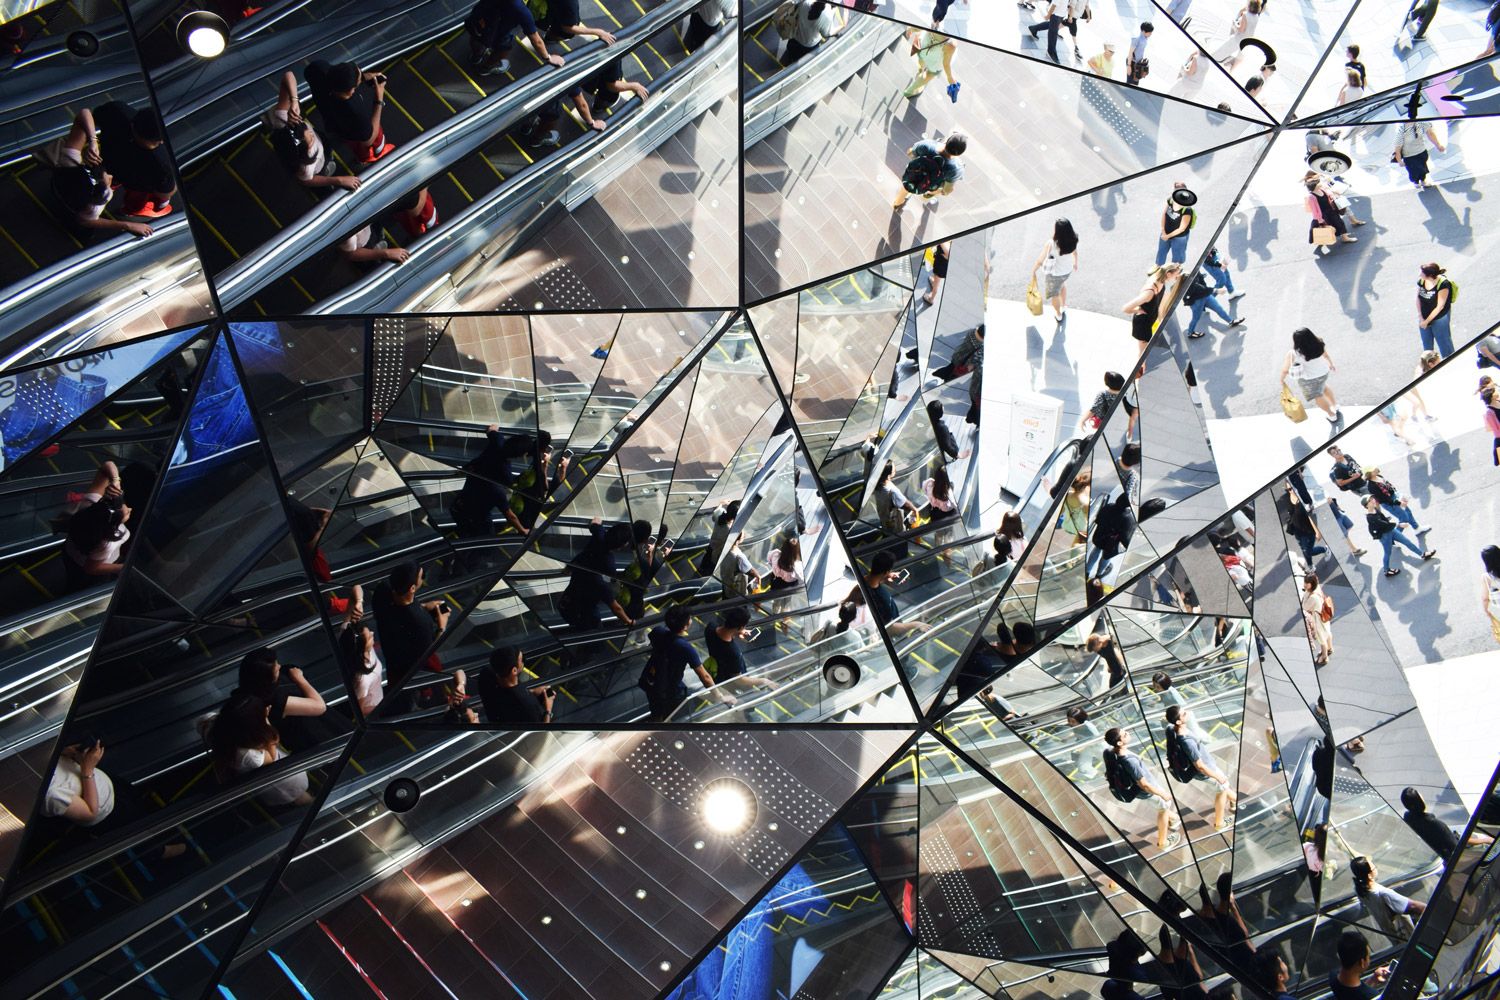 Kaleidoscopic view of people riding an escalator and exiting into a concrete plaza.